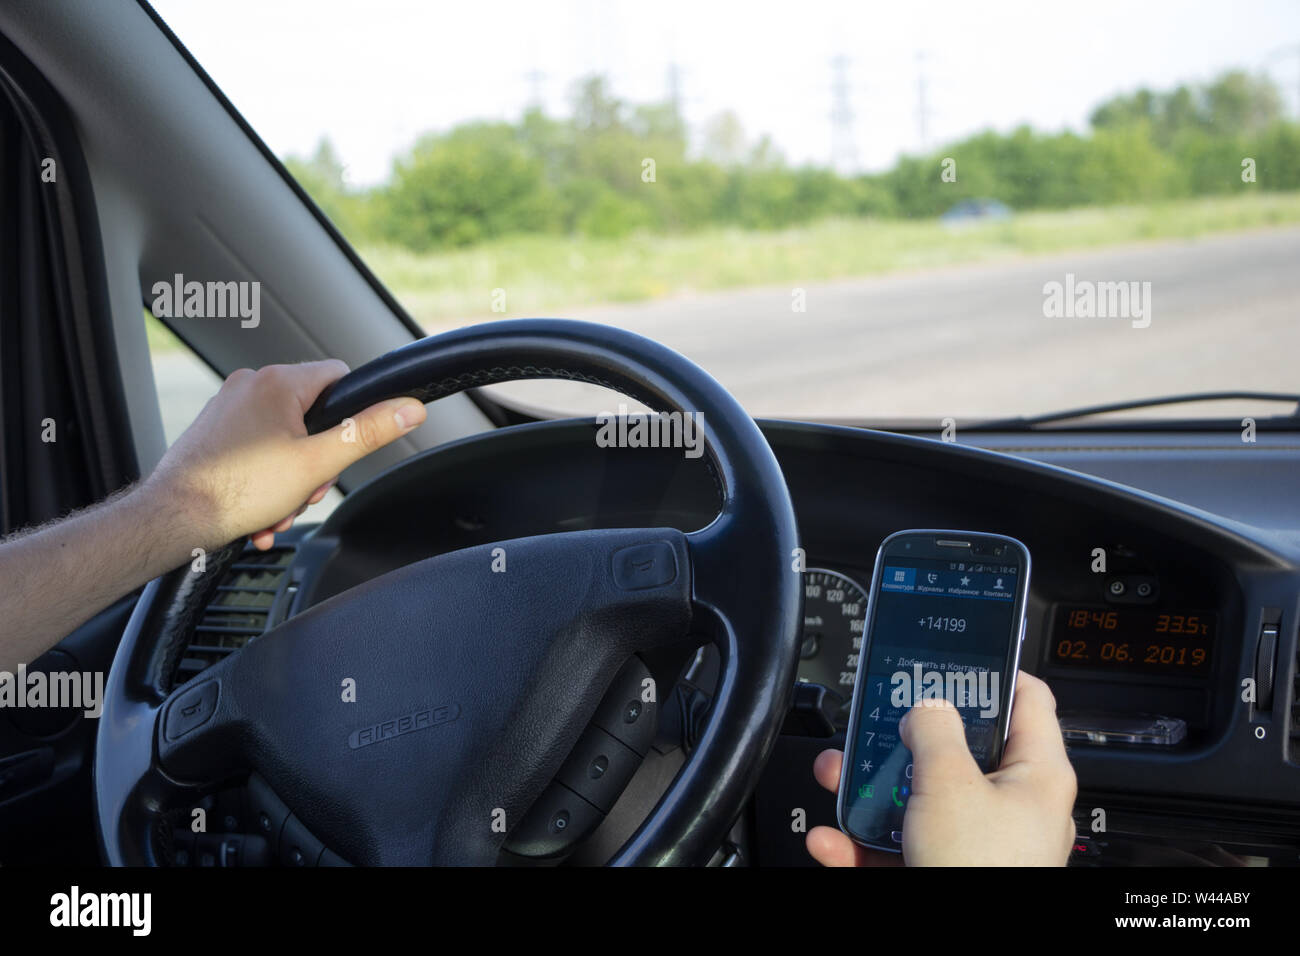 Distraction behind the wheel concept. A man dials a phone number on touch screen of smartphone while driving a car. View from behind. Safe journey. Ph Stock Photo